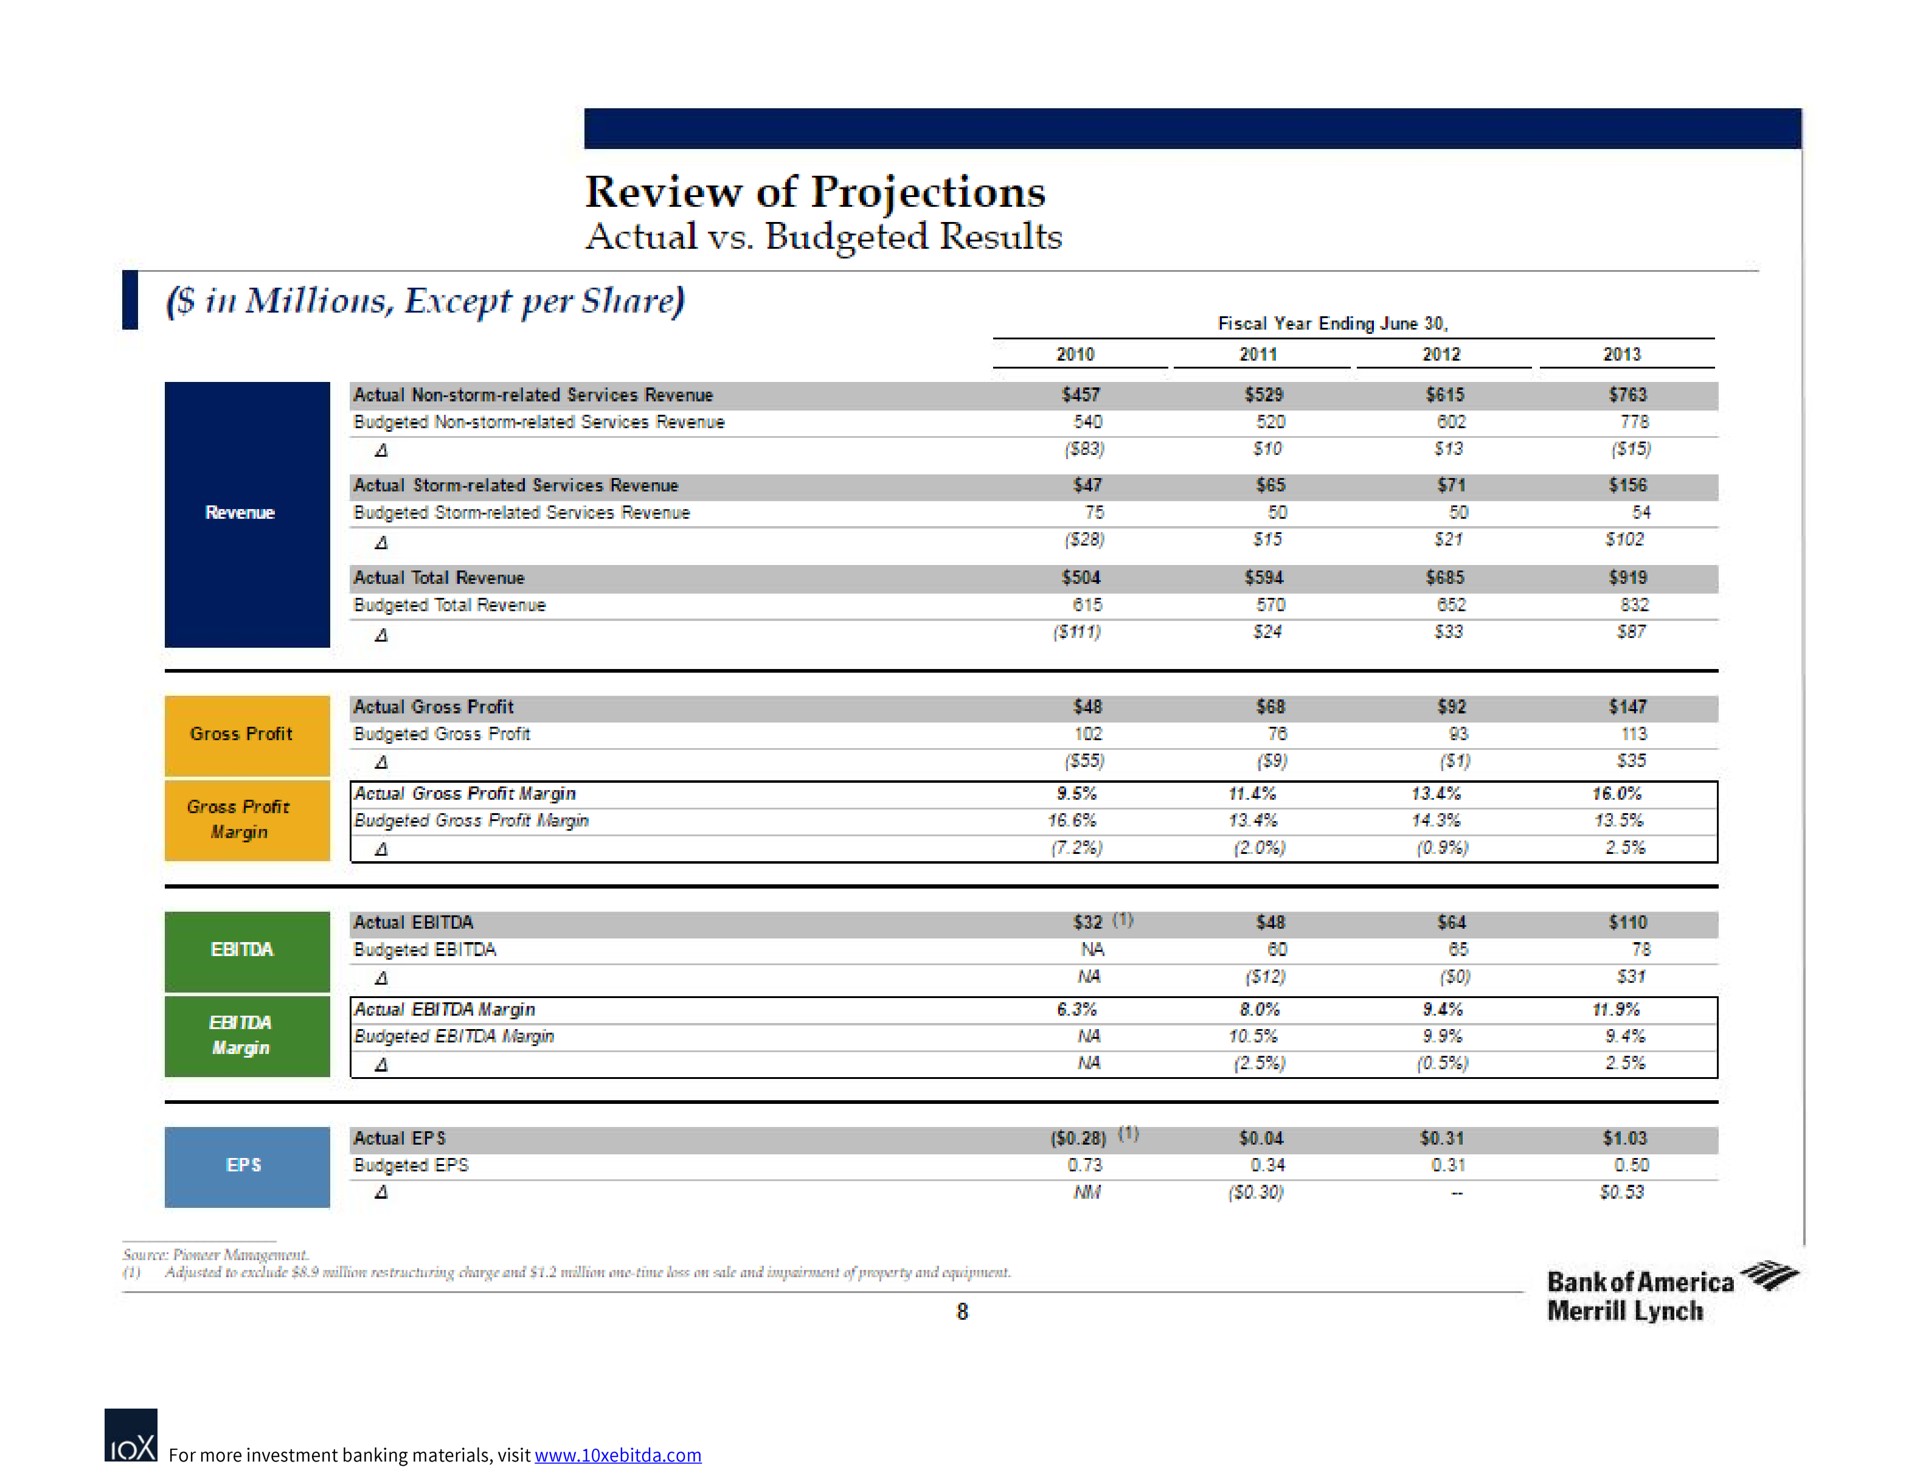 review of projections actual budgeted results in millions except per share | Bank of America